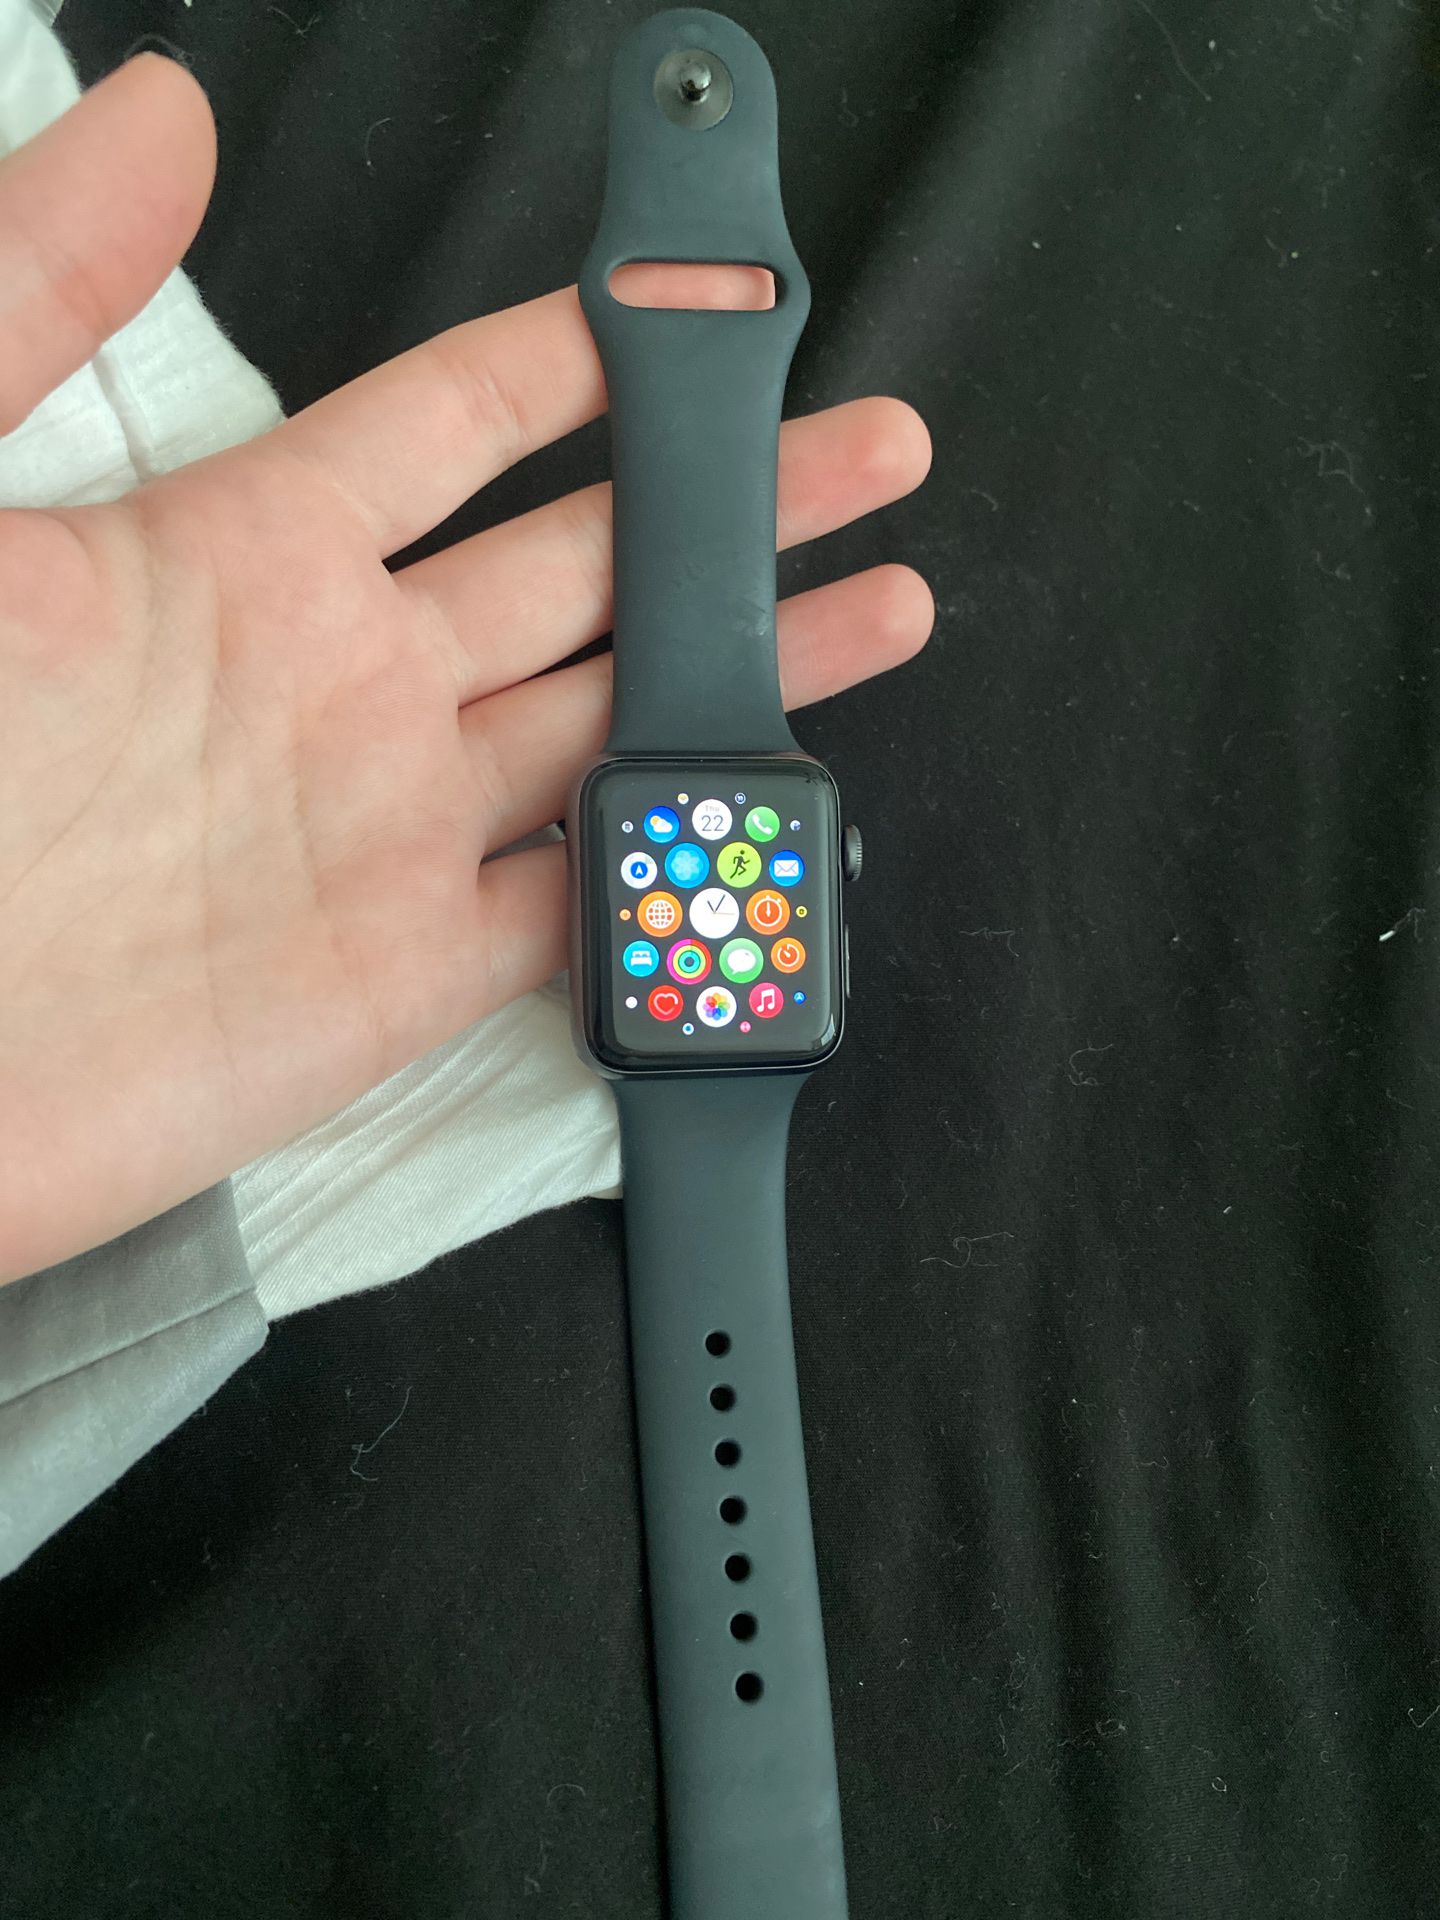 Apple Watch series 3. Works perfect